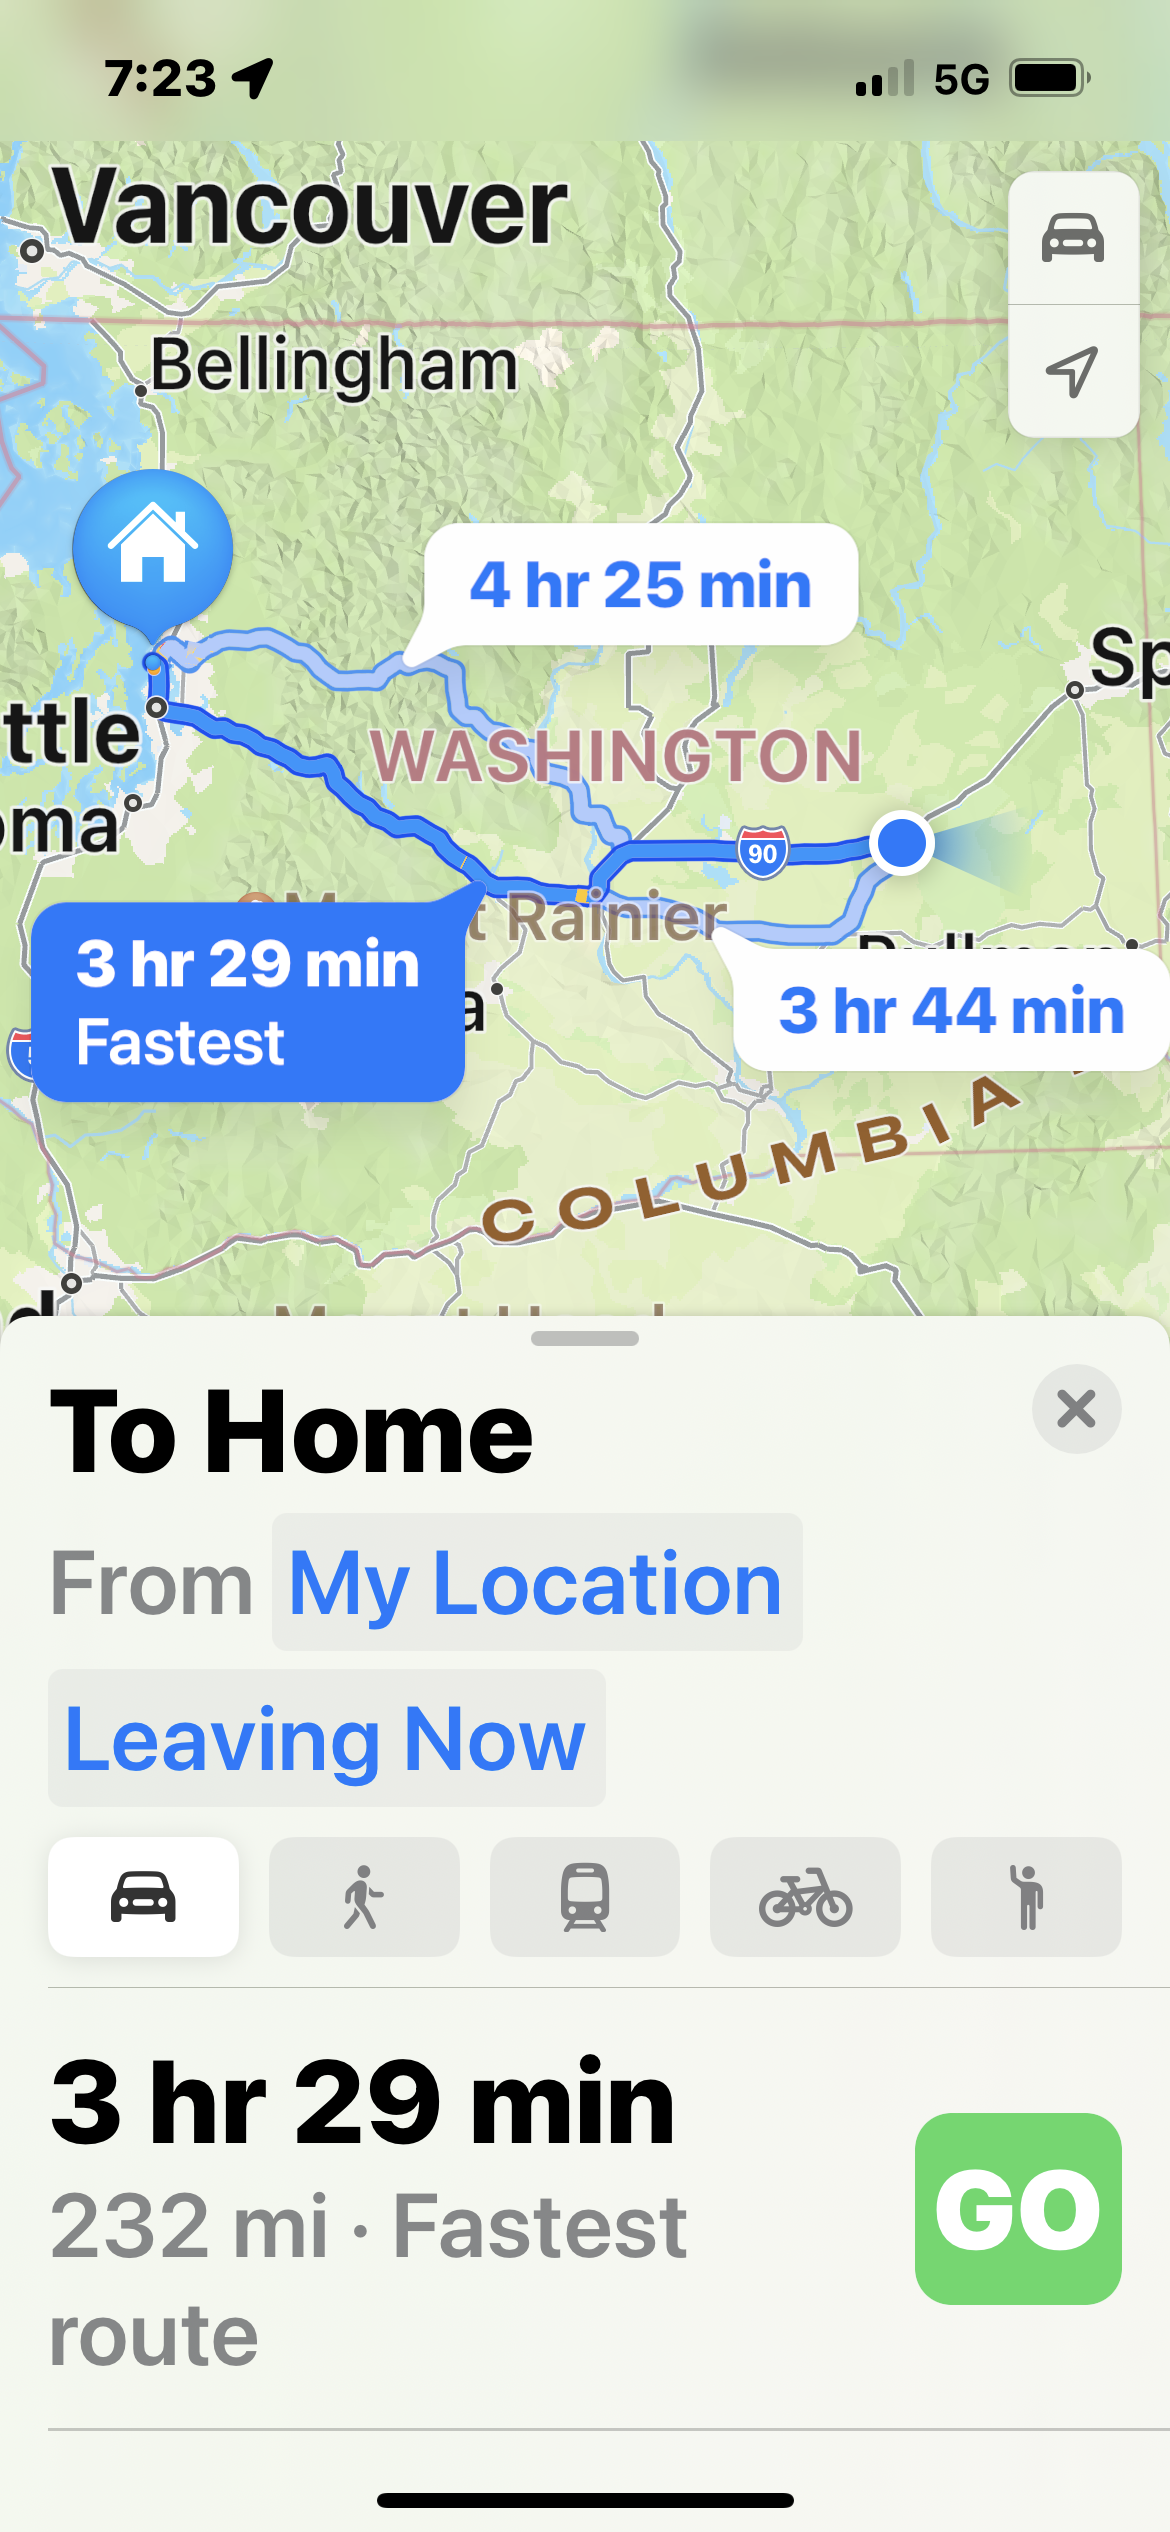 Apple Maps route plan showing route from "My Location" (Ritzville, WA at the time) to Seattle. Fastest route of 232 miles, 3-1/2 hours 